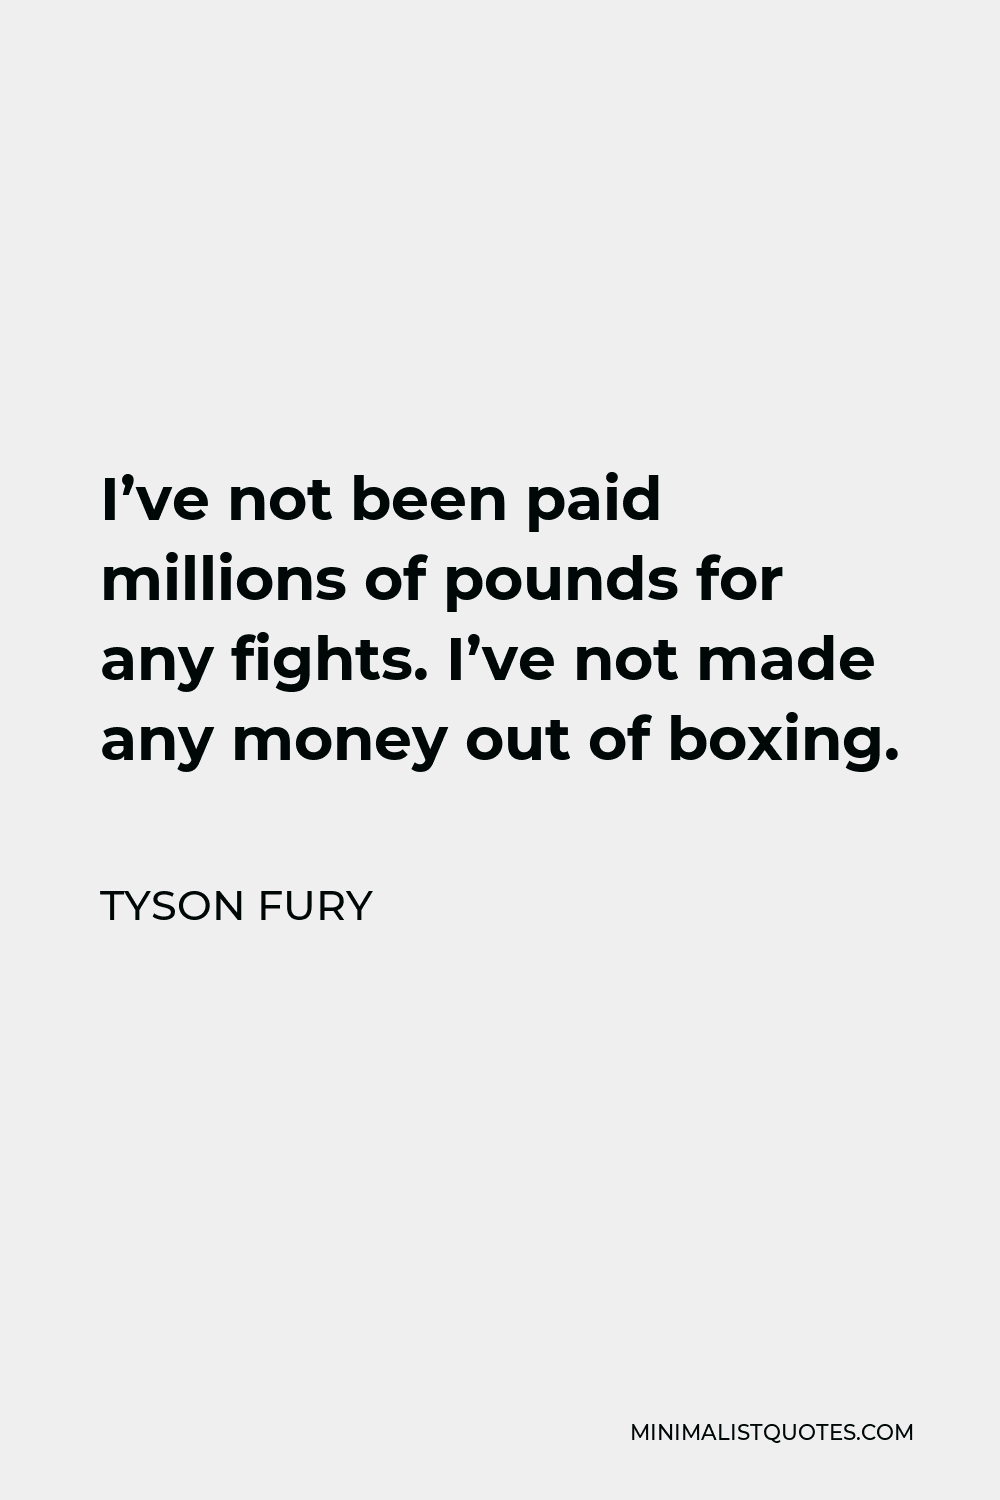 Tyson Fury Quote - I’ve not been paid millions of pounds for any fights. I’ve not made any money out of boxing.